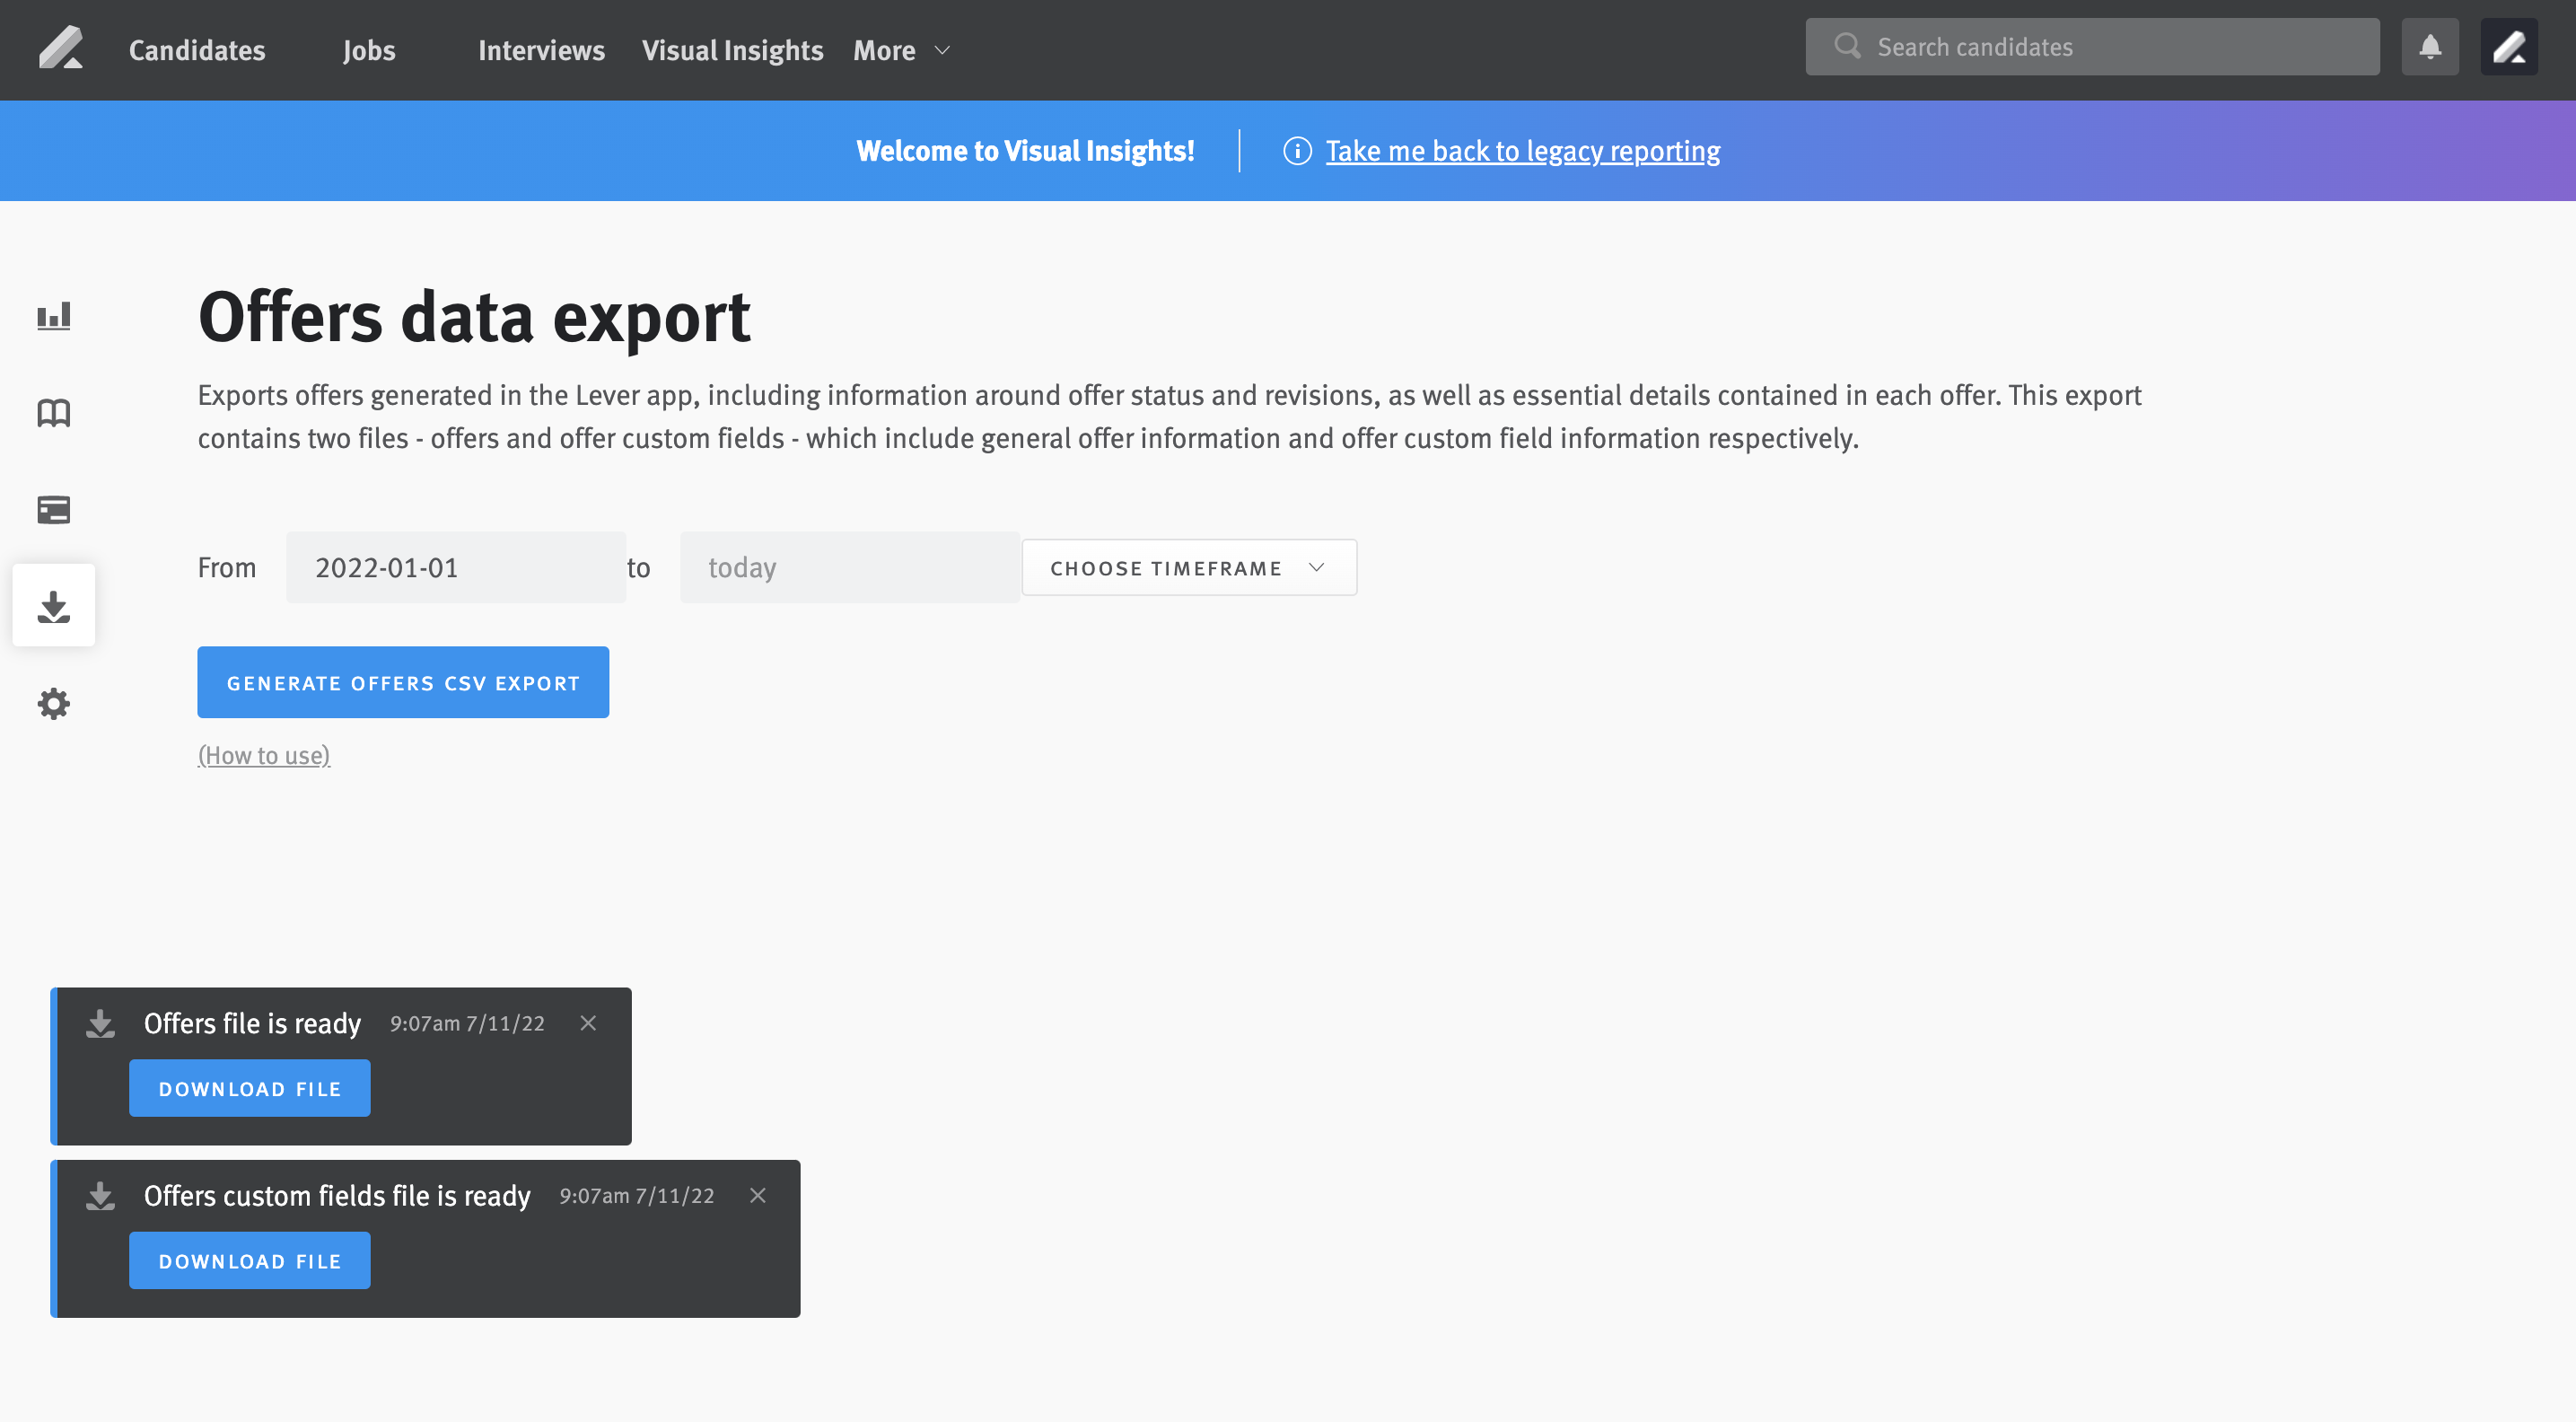 Offers data export page with pop-ups indicating the Offers file and Offers custom fields file is ready for download.